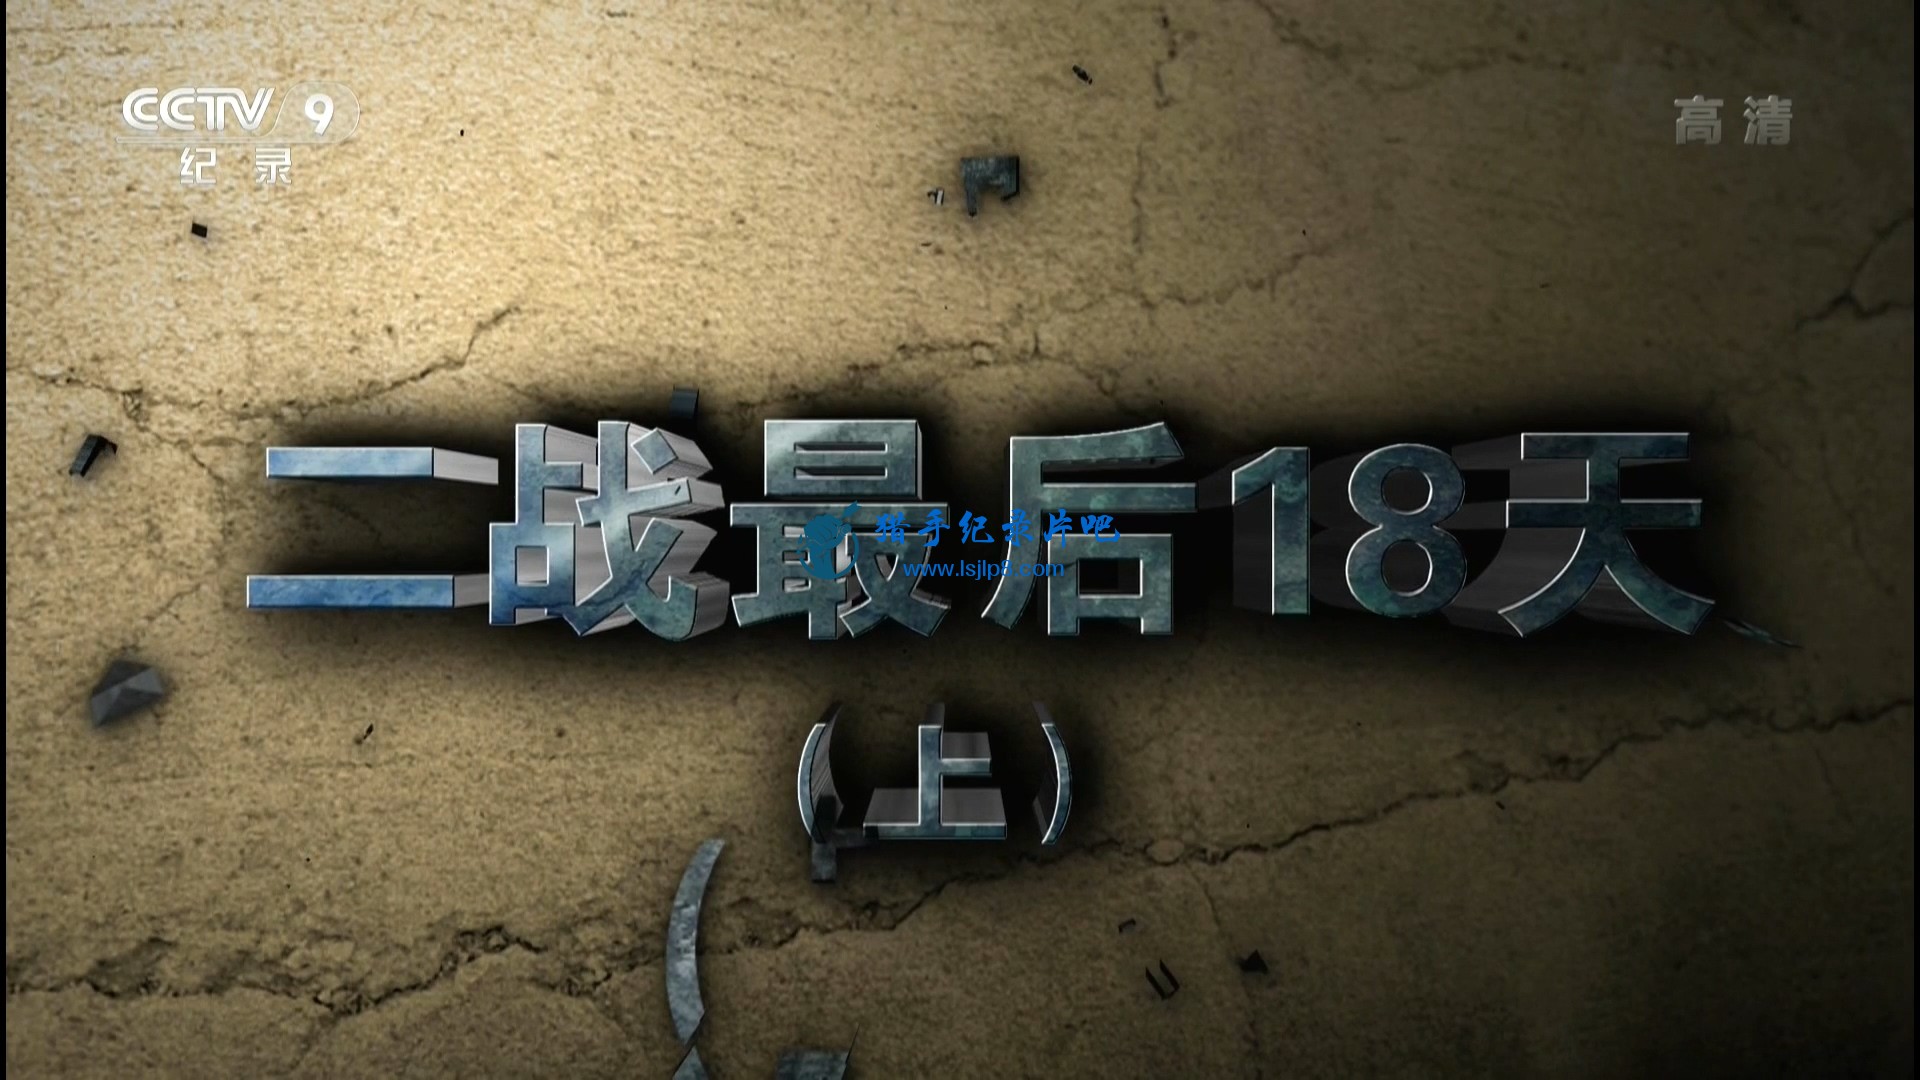 20151202_CCTV-9_Time-The.Last.13.Days.of.WWII.EP01-jlp.ts_20200302_154959.322.jpg